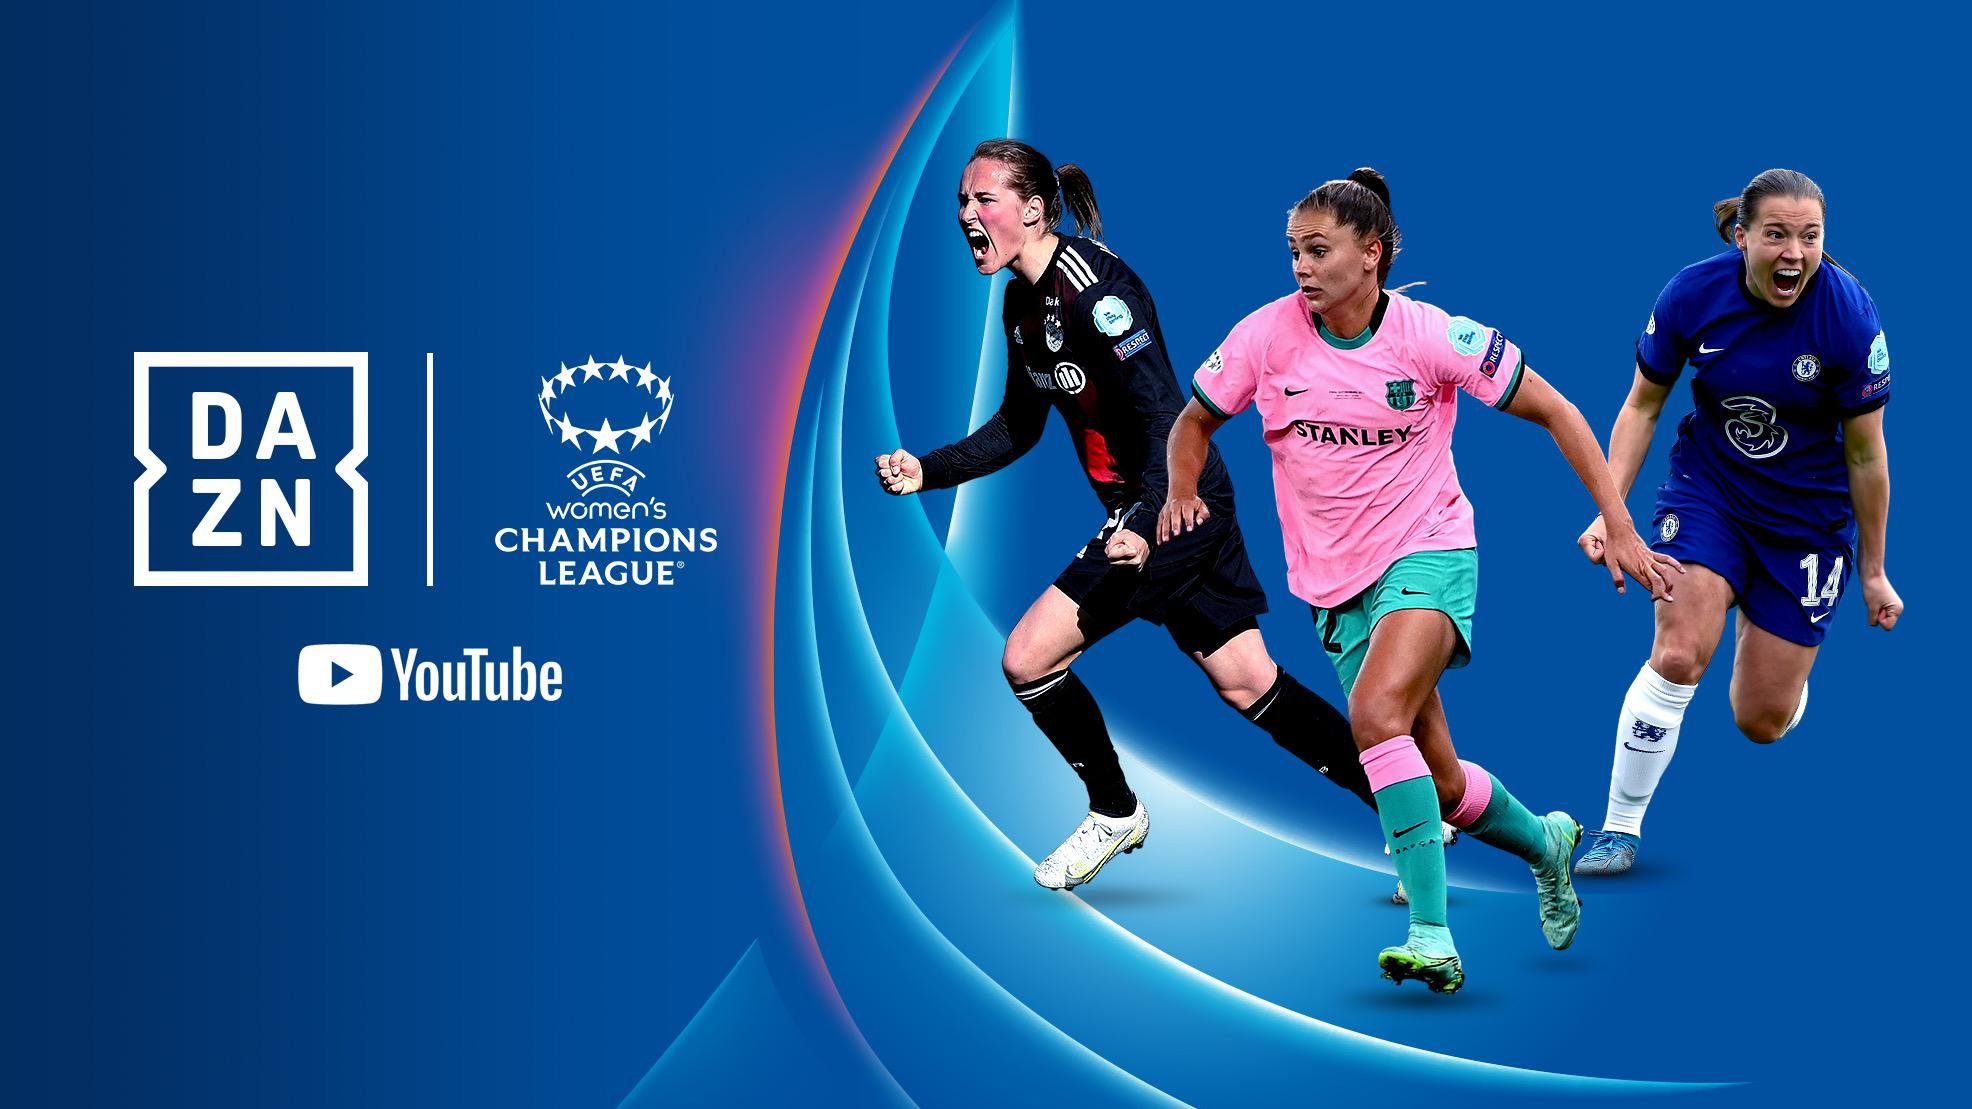 DAZN makes womens Champions League free to view globally in landmark UEFA deal